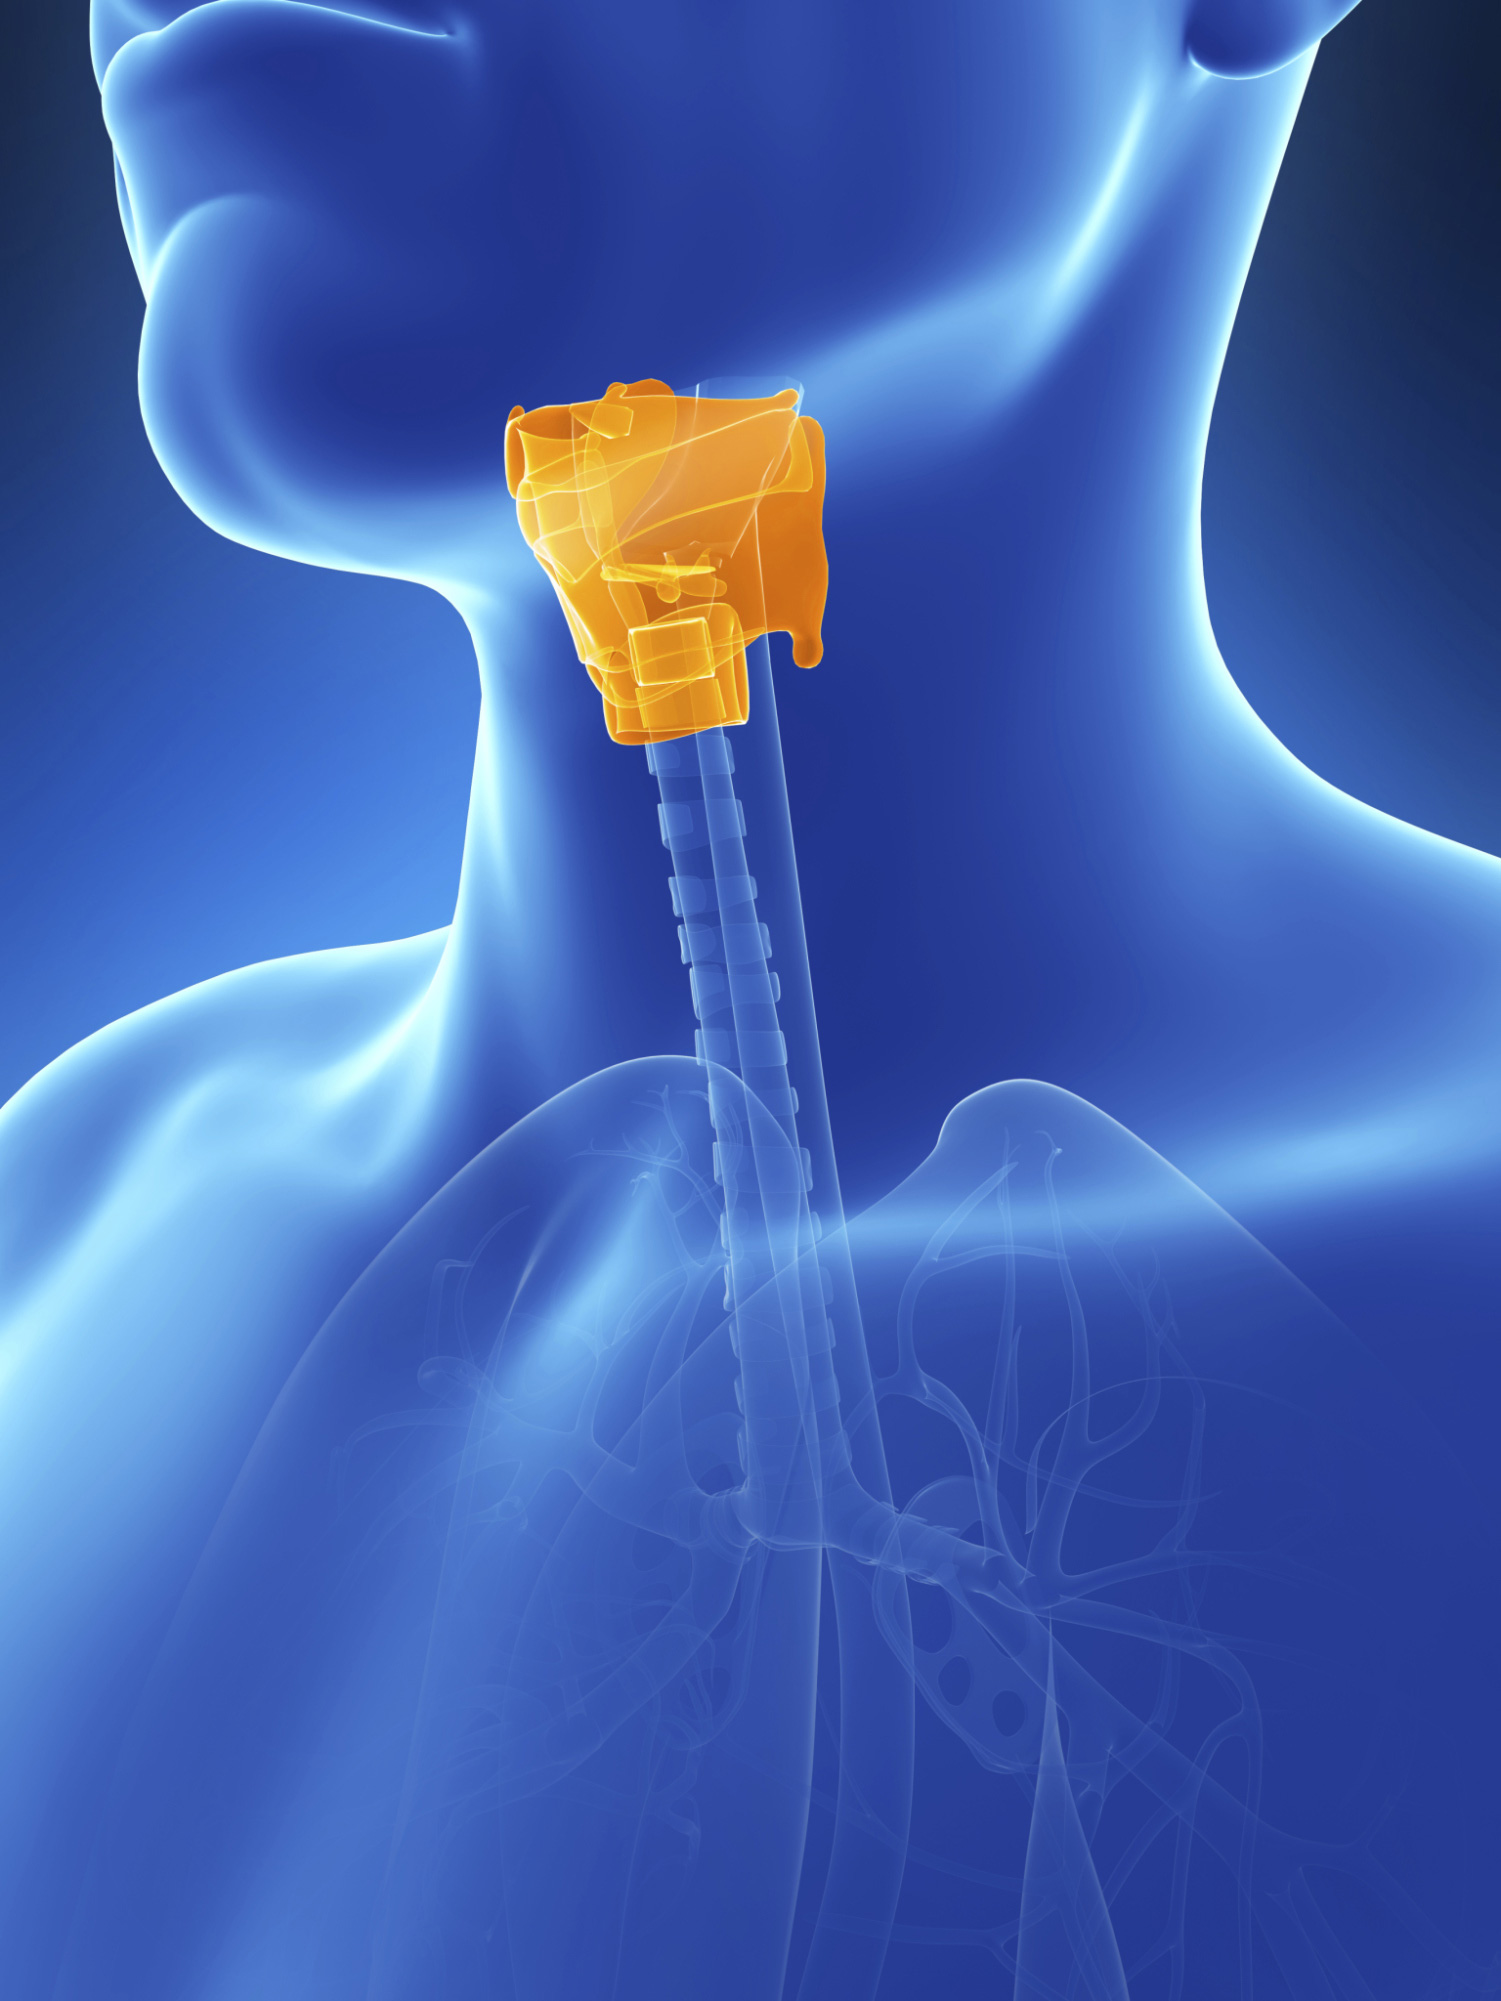 Illustration of the larynx at the top of the neck.